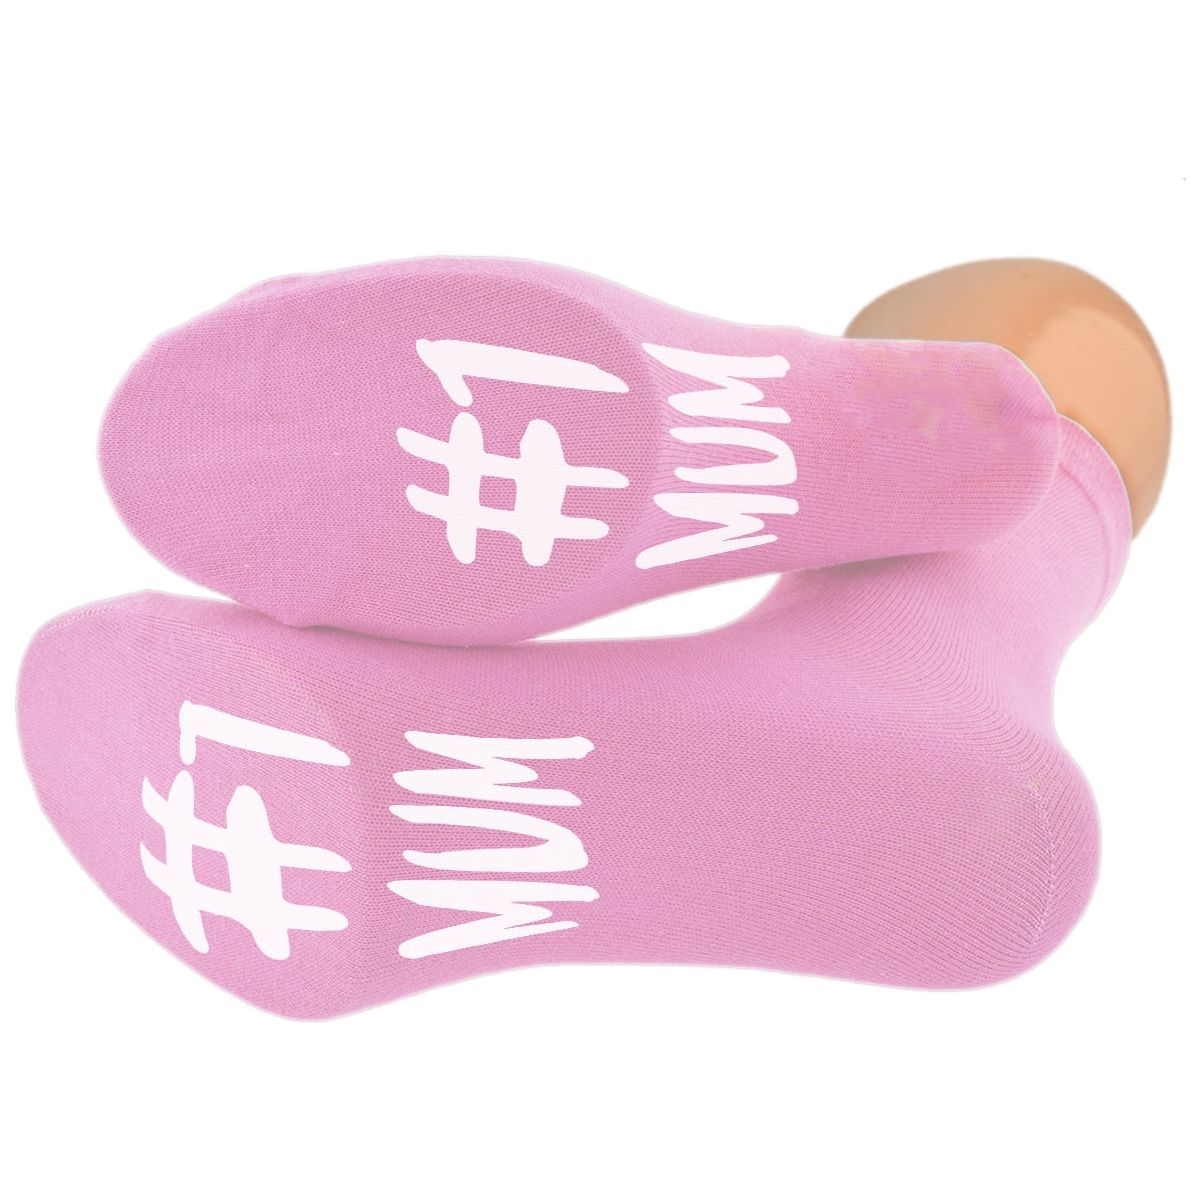 #1 Mum Sole Print Socks for your Number One Mum! - Ashton and Finch